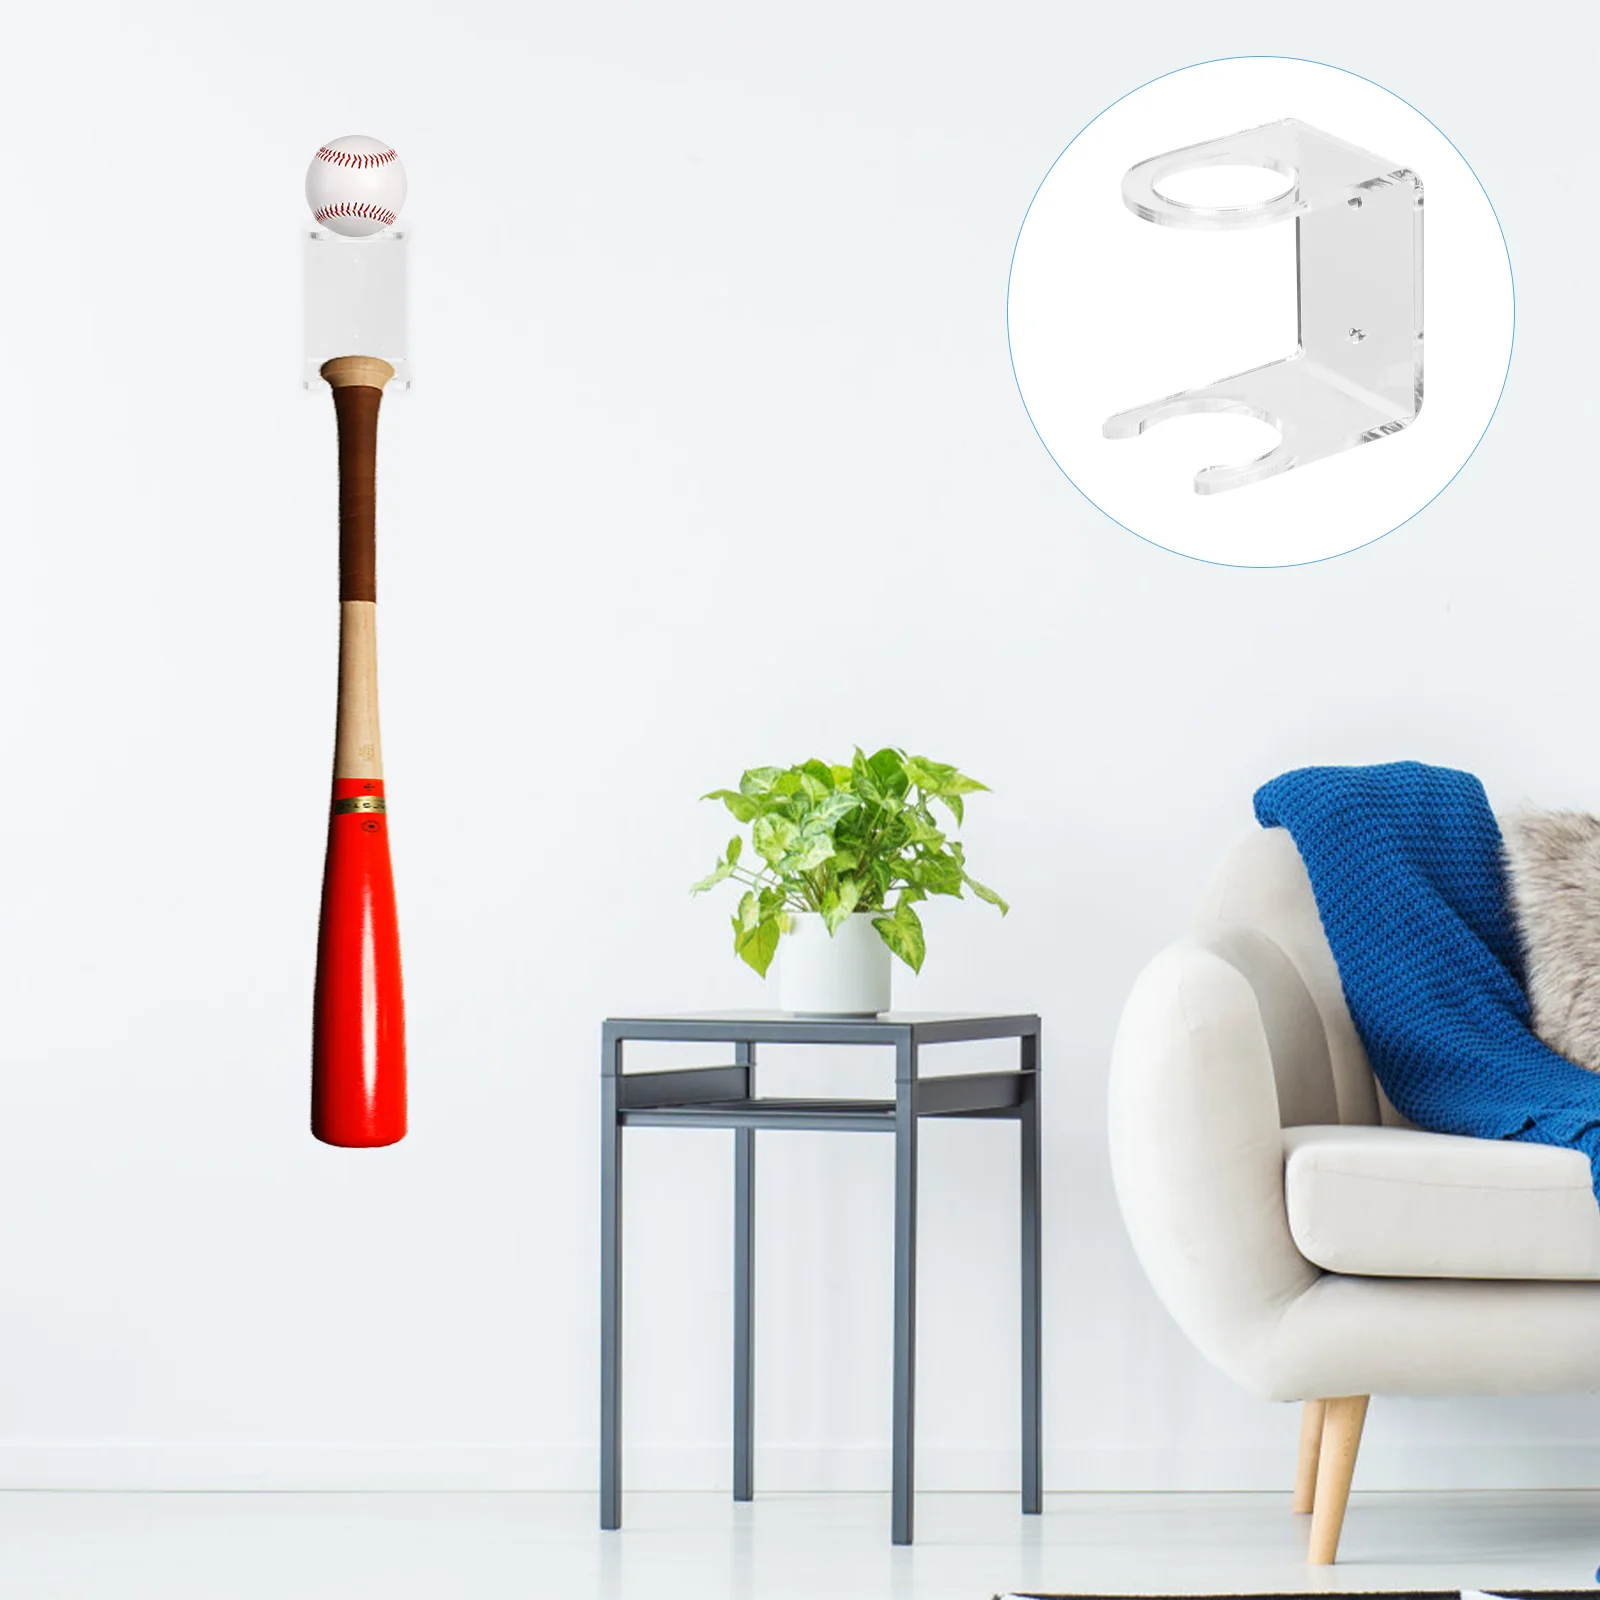 

Baseball Bat Storage Rack Showing Display Racks Stand Wall Mounted Holder Convenient Support Multi-Functional For Home